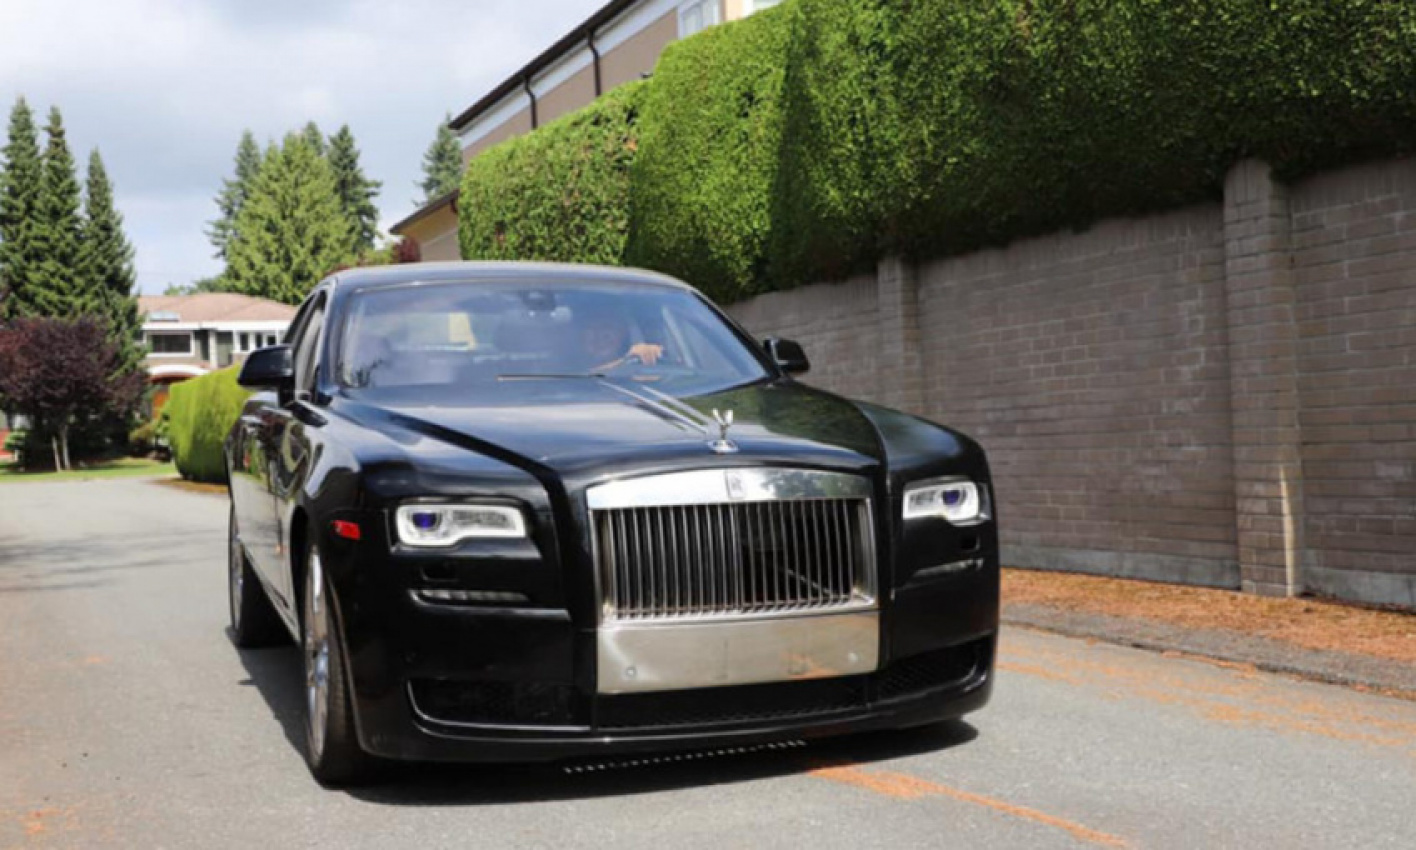 autos, cars, news blogs, rolls-royce, electric vehicle, ev, ev conversion, rolls royce wraith, rolls-royce spectre, spectre, wraith, rolls-royce wraith ev painstakingly converted over four years